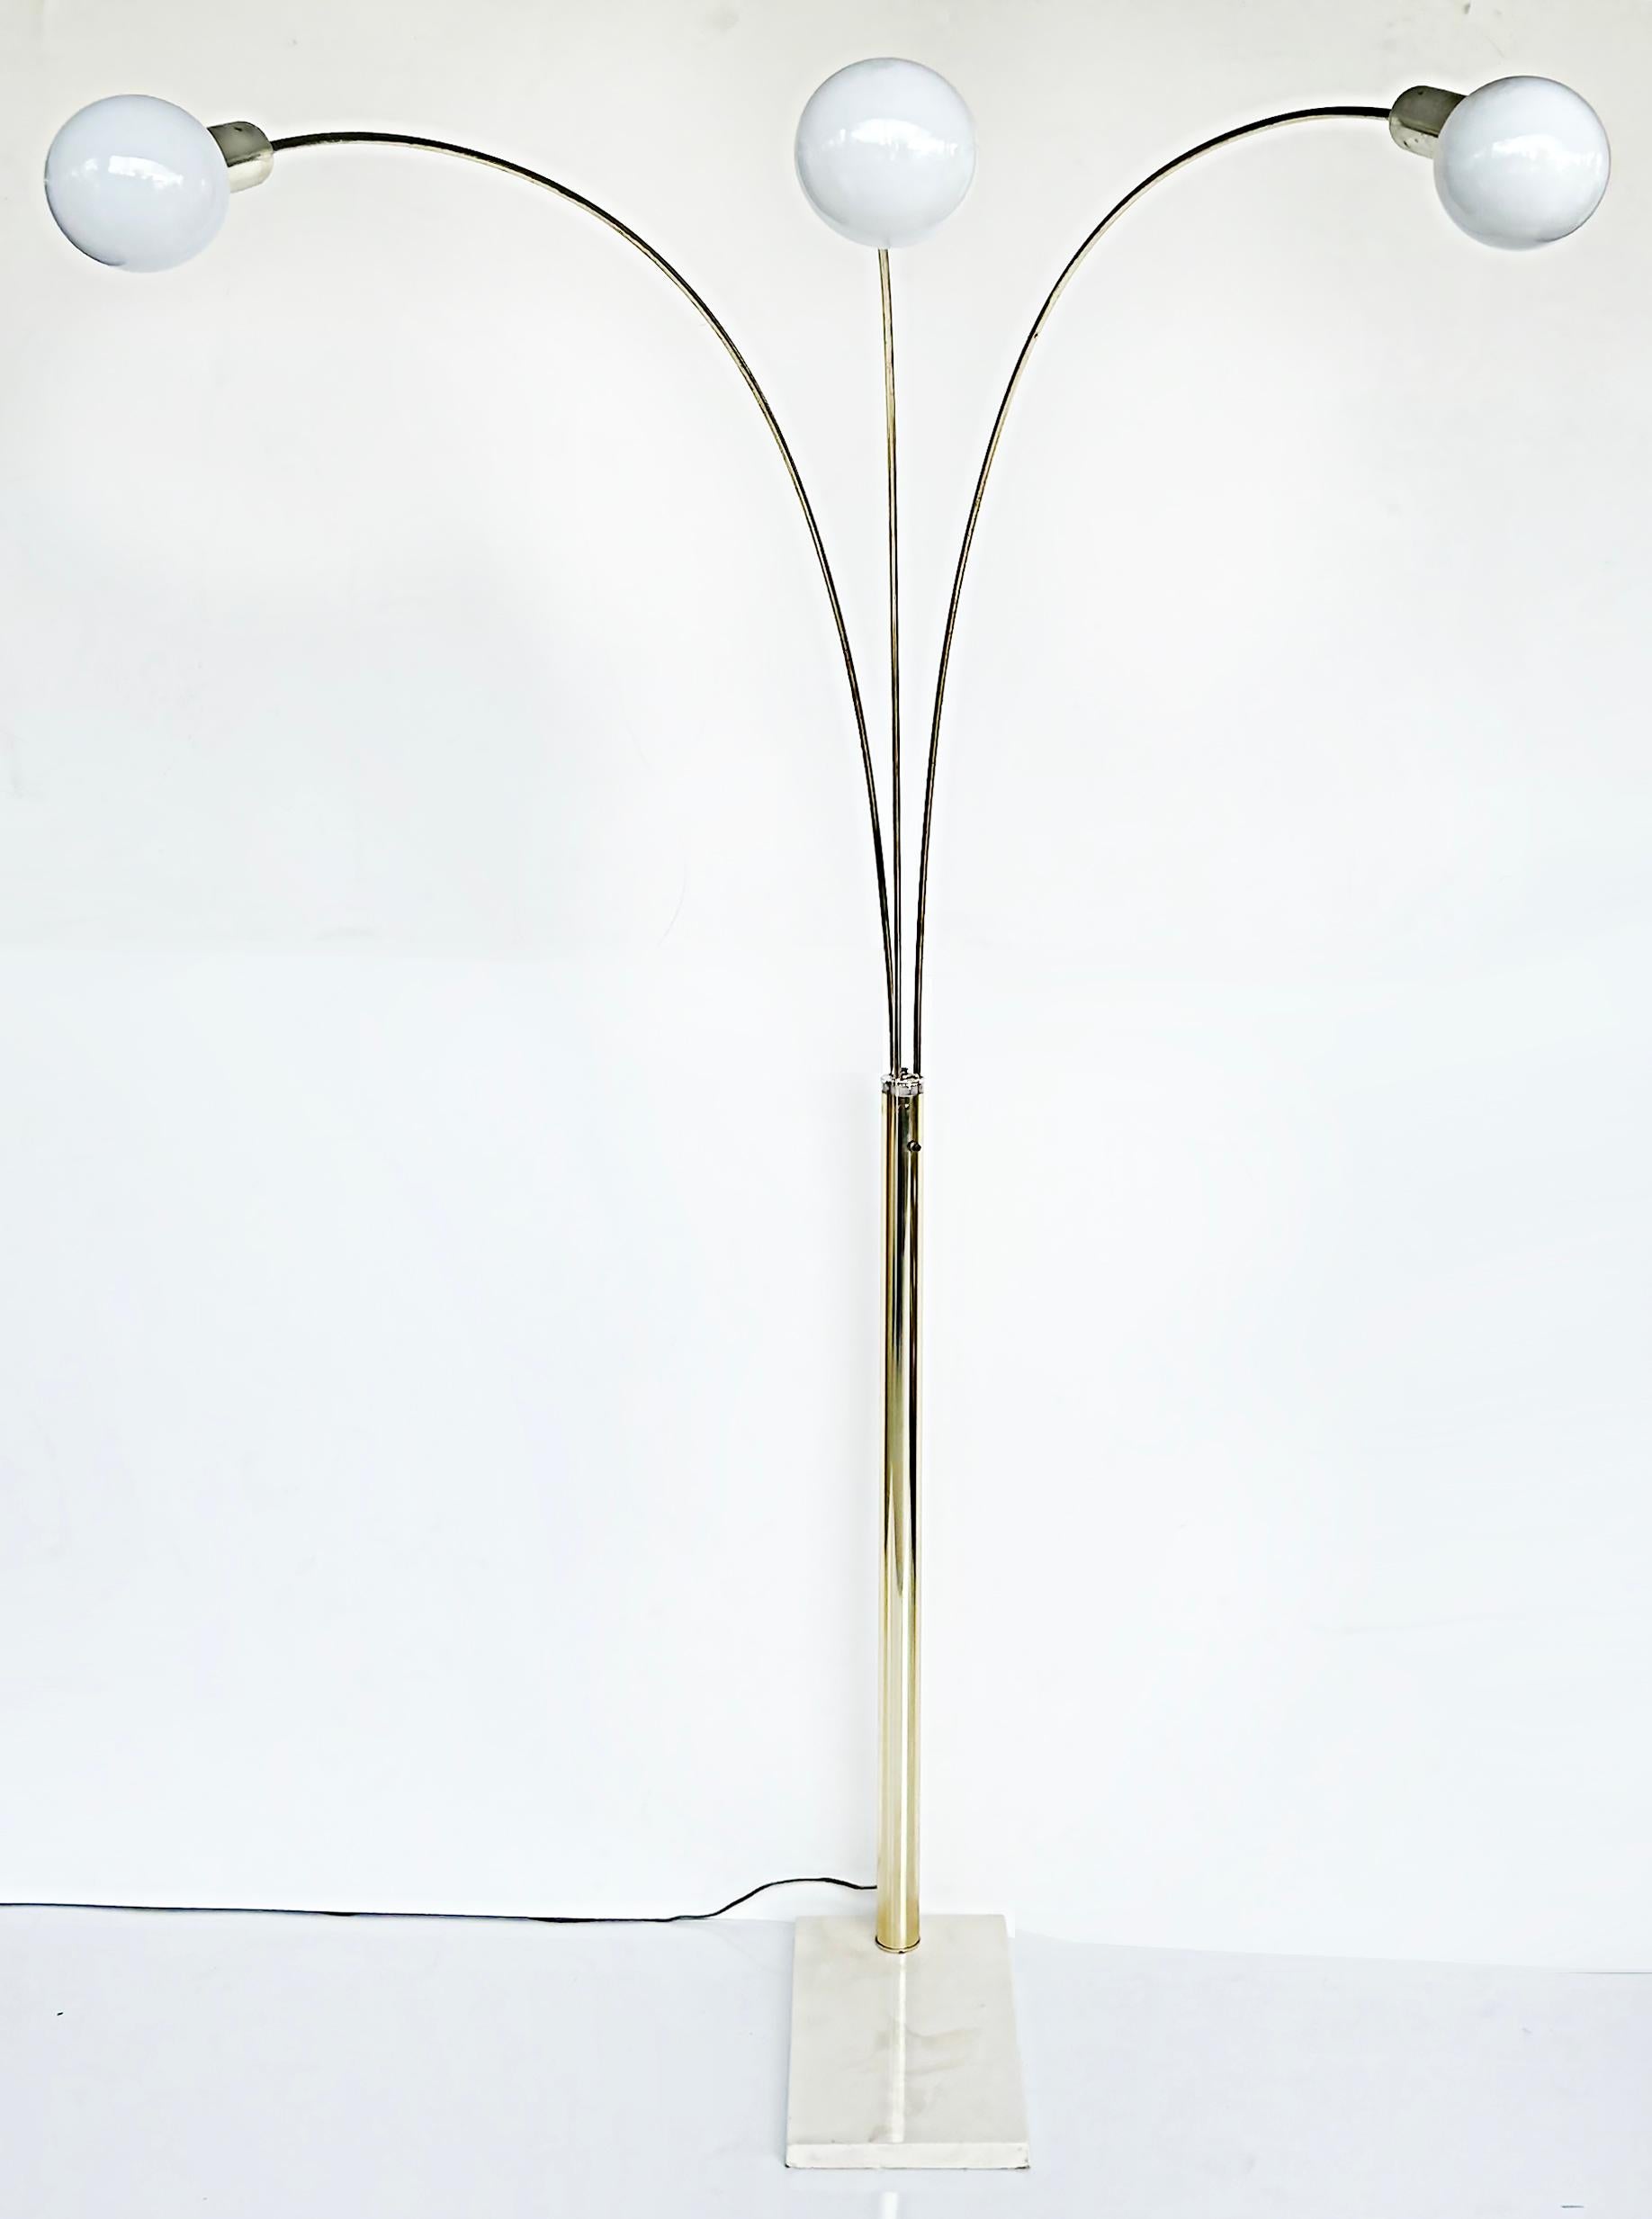 Mid-Century Modern Brass Arched Floor Lamp, Marble Base

Offered for sale is a recent acquisition from a Miami Beach estate, a Mid-Century Modern brass floor lamp with three arched arms supported by a cream-colored marble base. This lamp